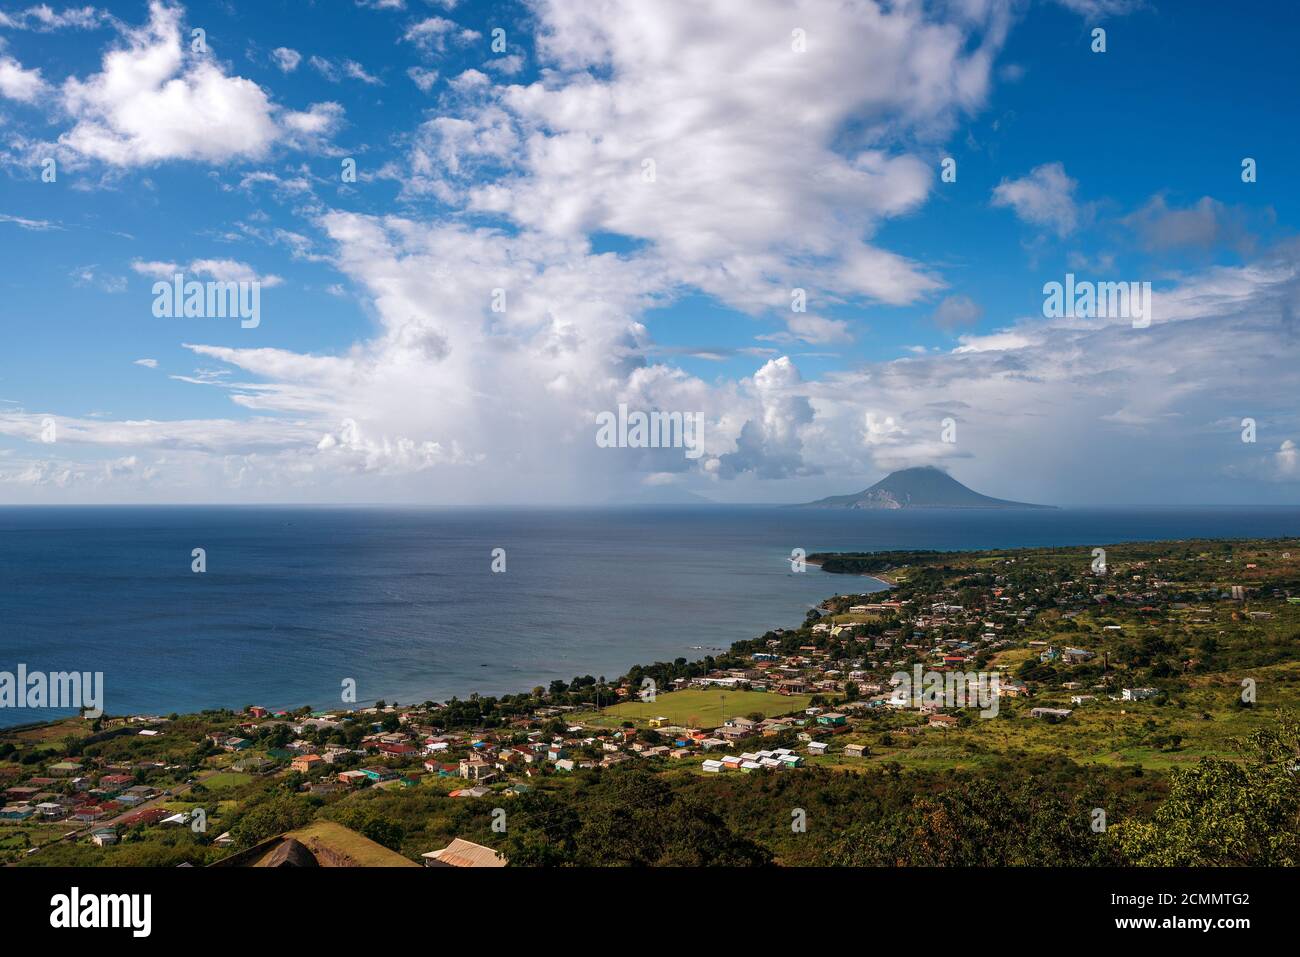 Federation of Saint Kitts and Nevis Stock Photo